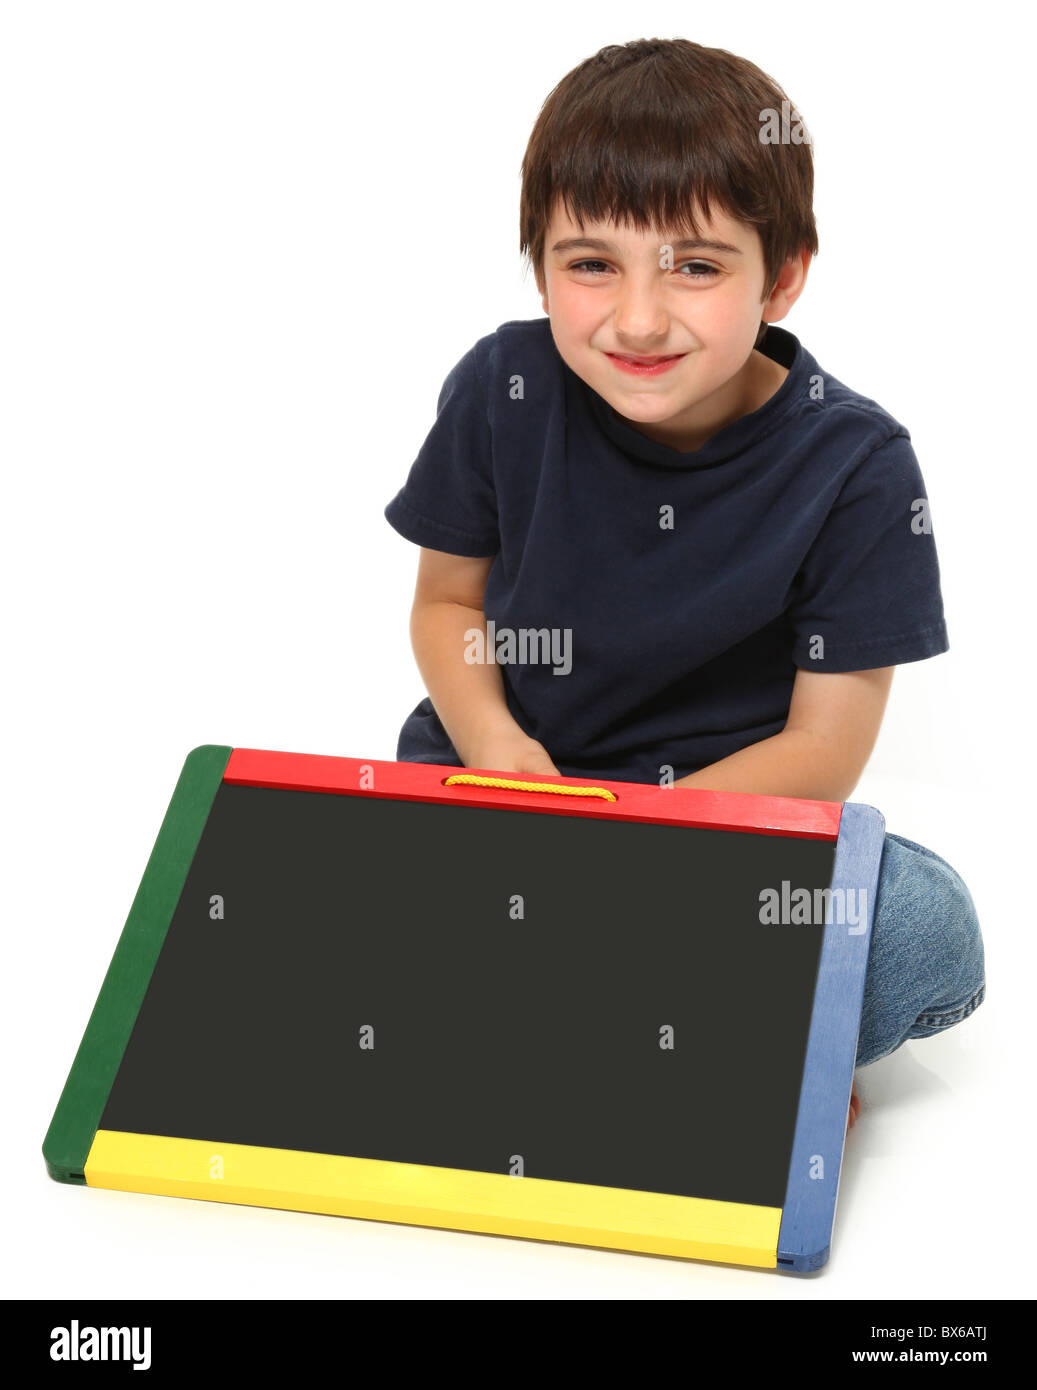 adorable seven year old boy holding blank chalkboard Stock Photo